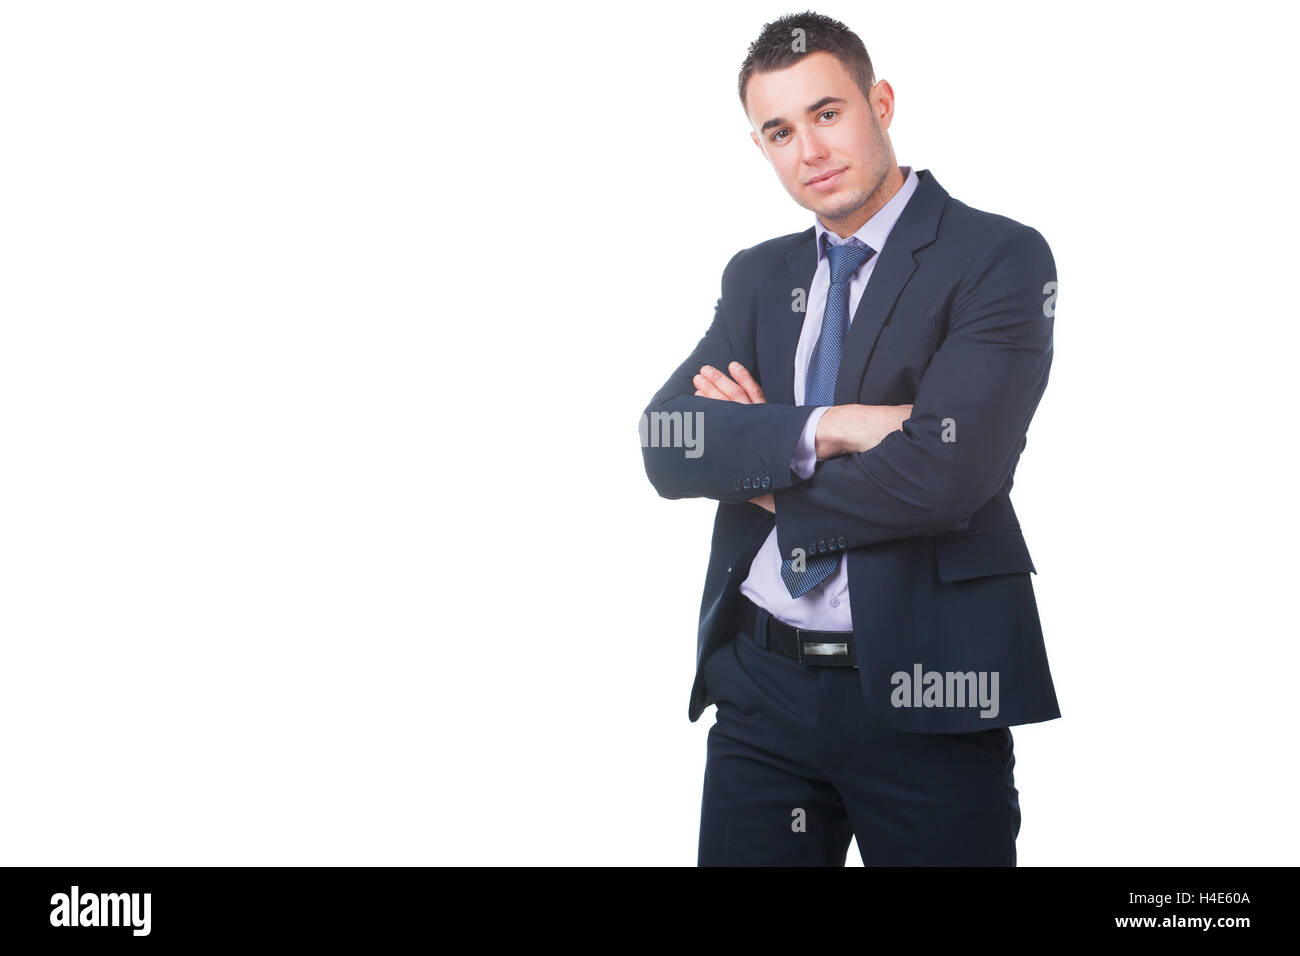 Handsome young businessman Stock Photo